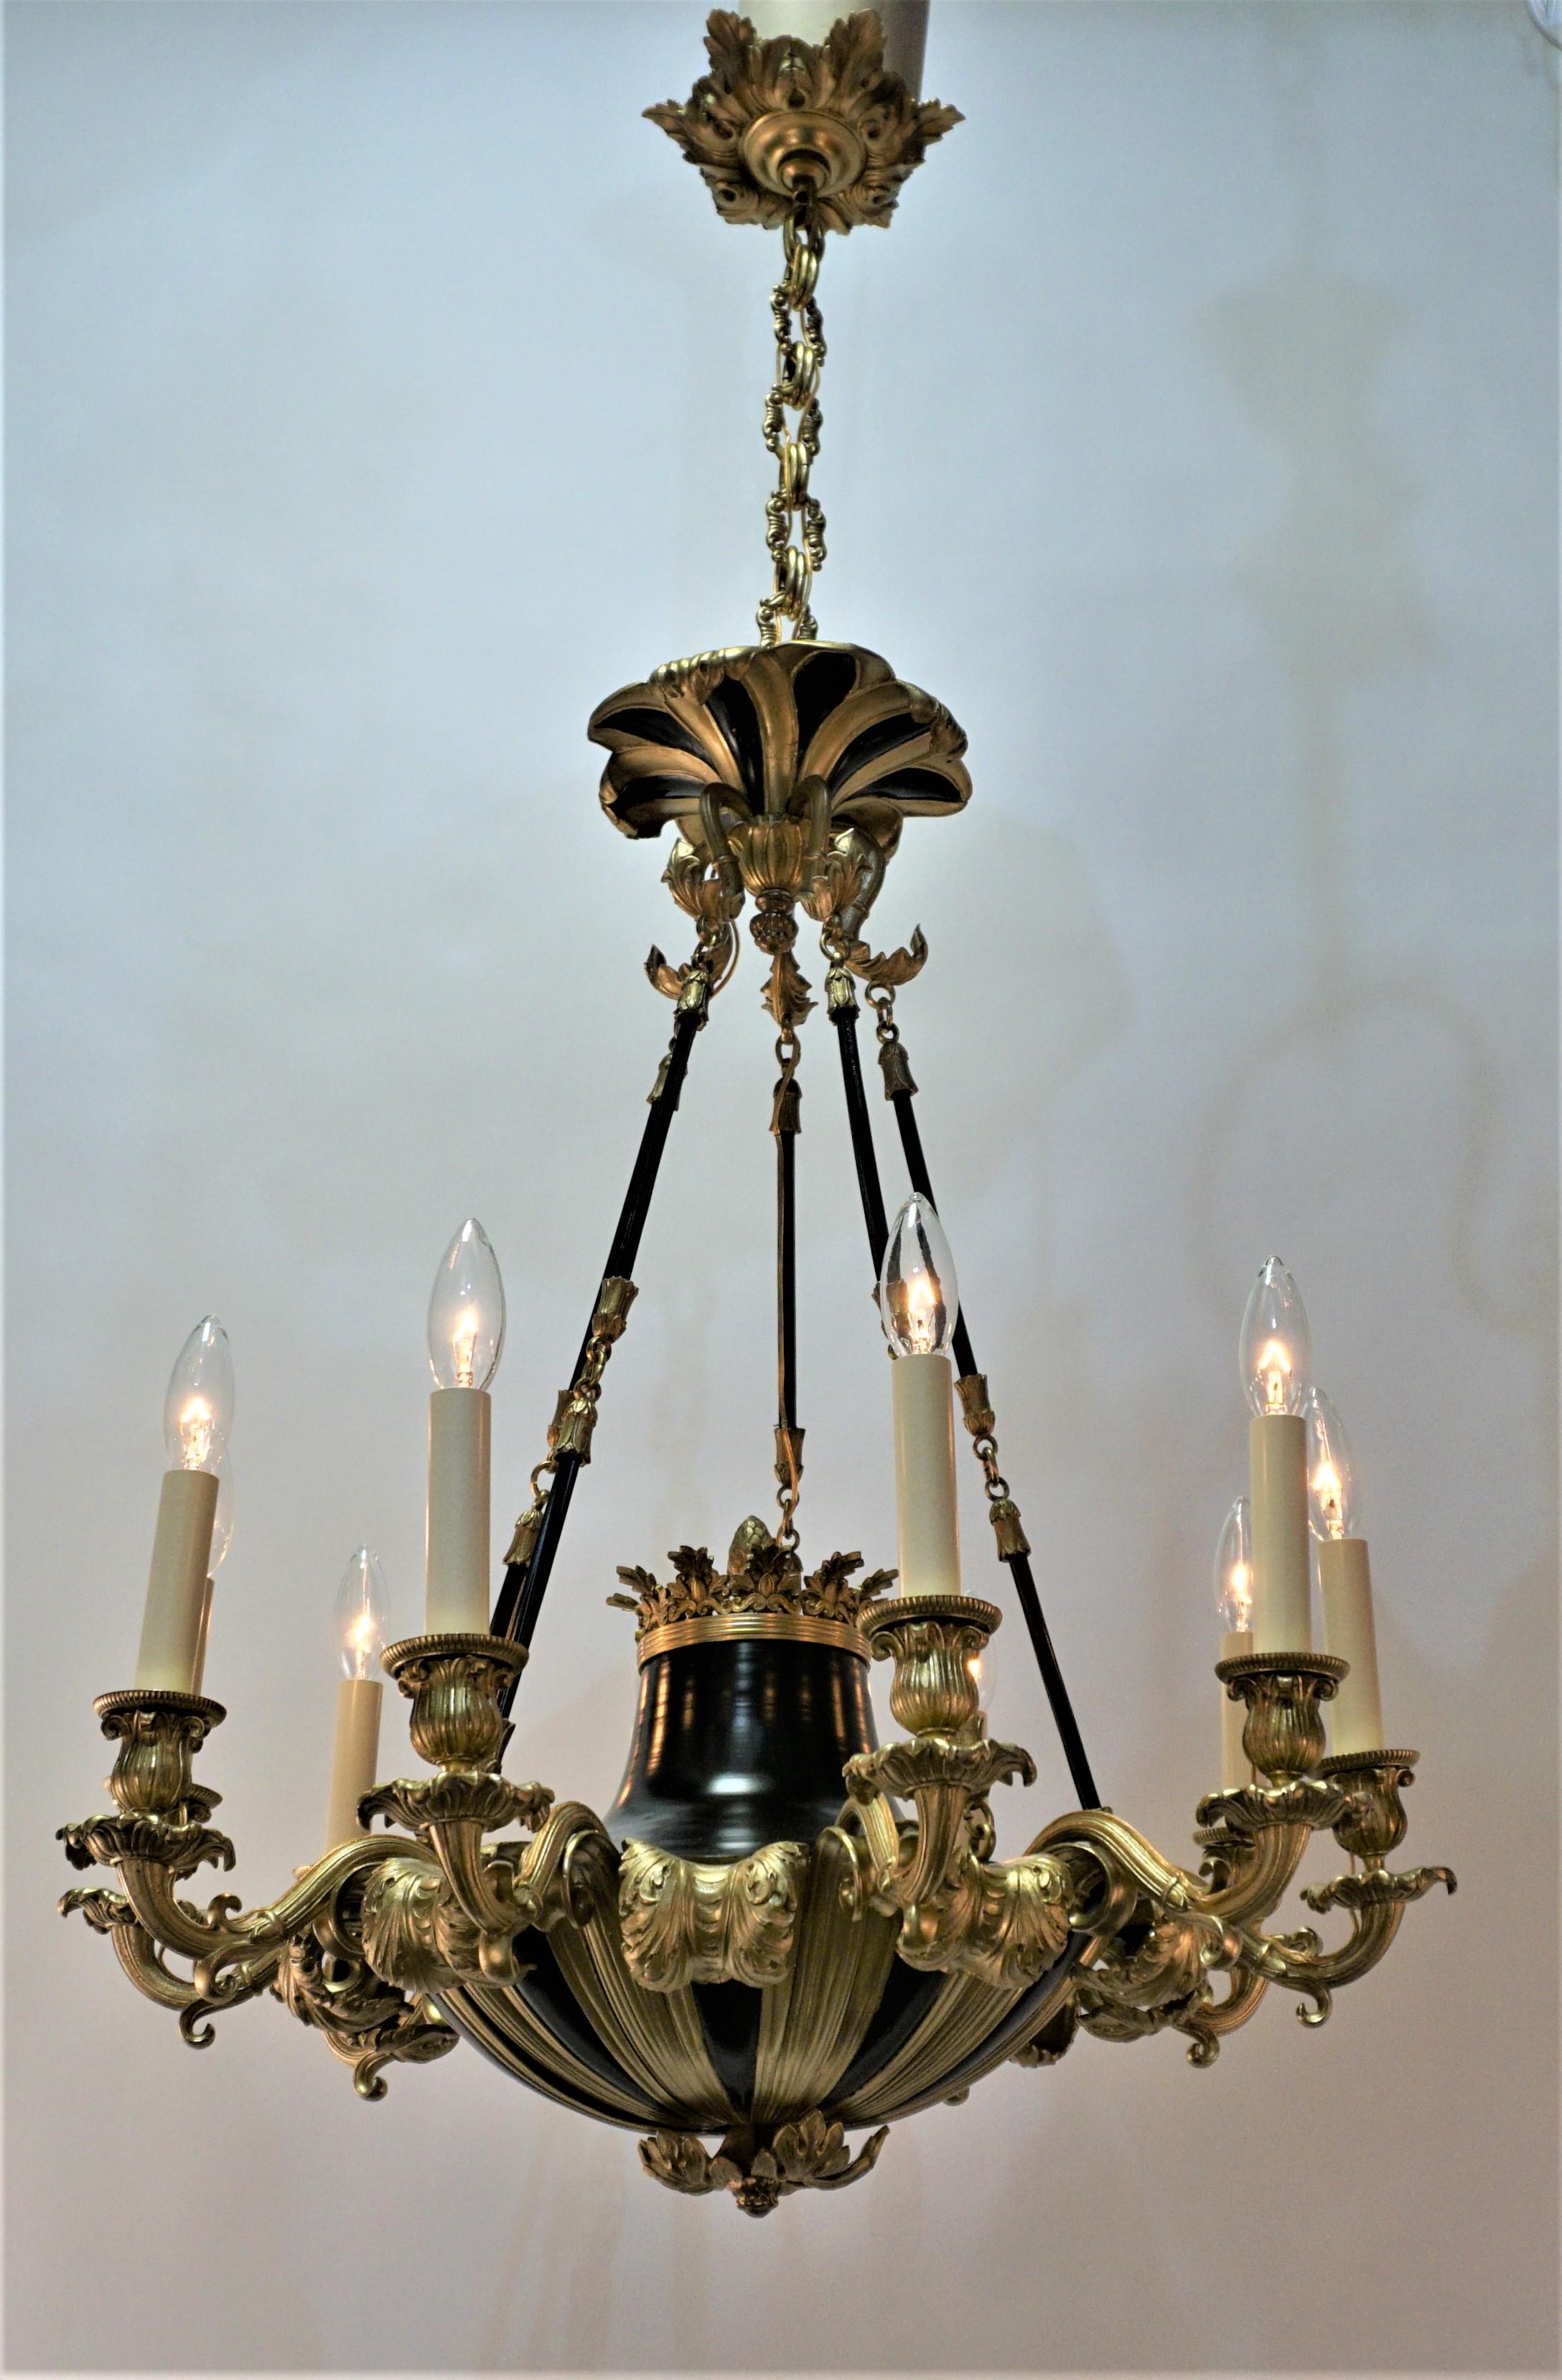 French 19th century bronze electrified Empire style ten arm chandelier.
Minimum height fully installed ( 1 link chain ) 33